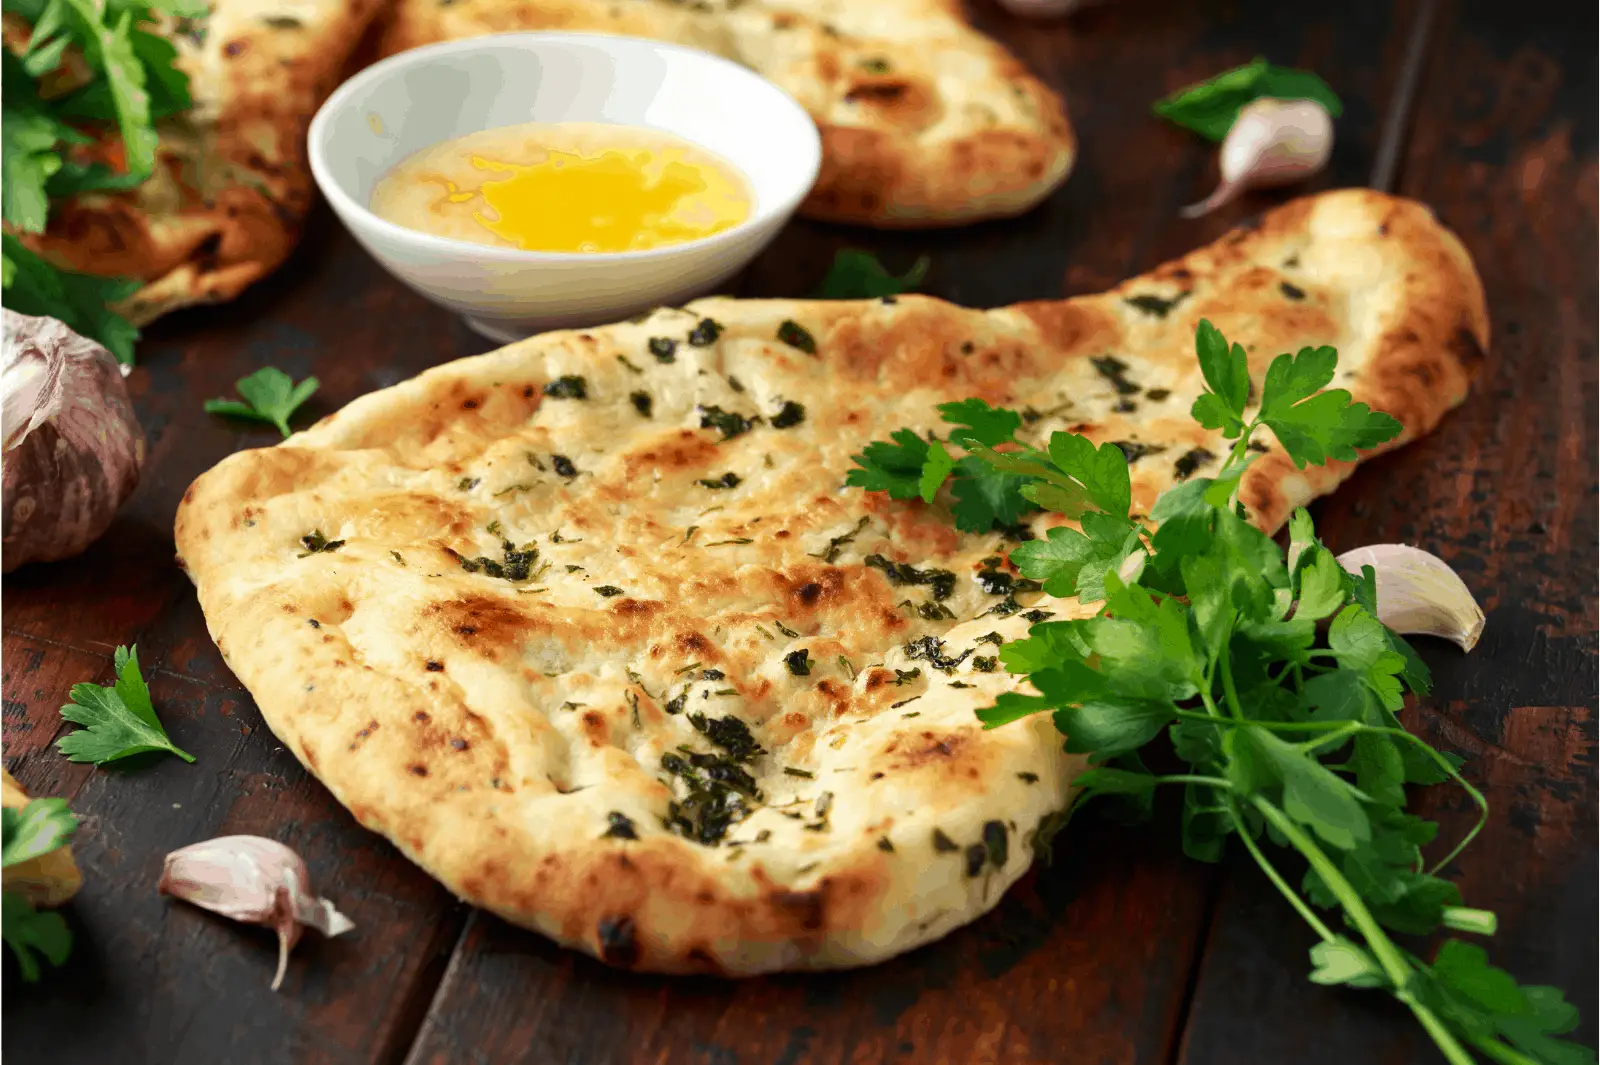 How to Reheat Naan Bread - The Ultimate Guide - The Kitchen Journal